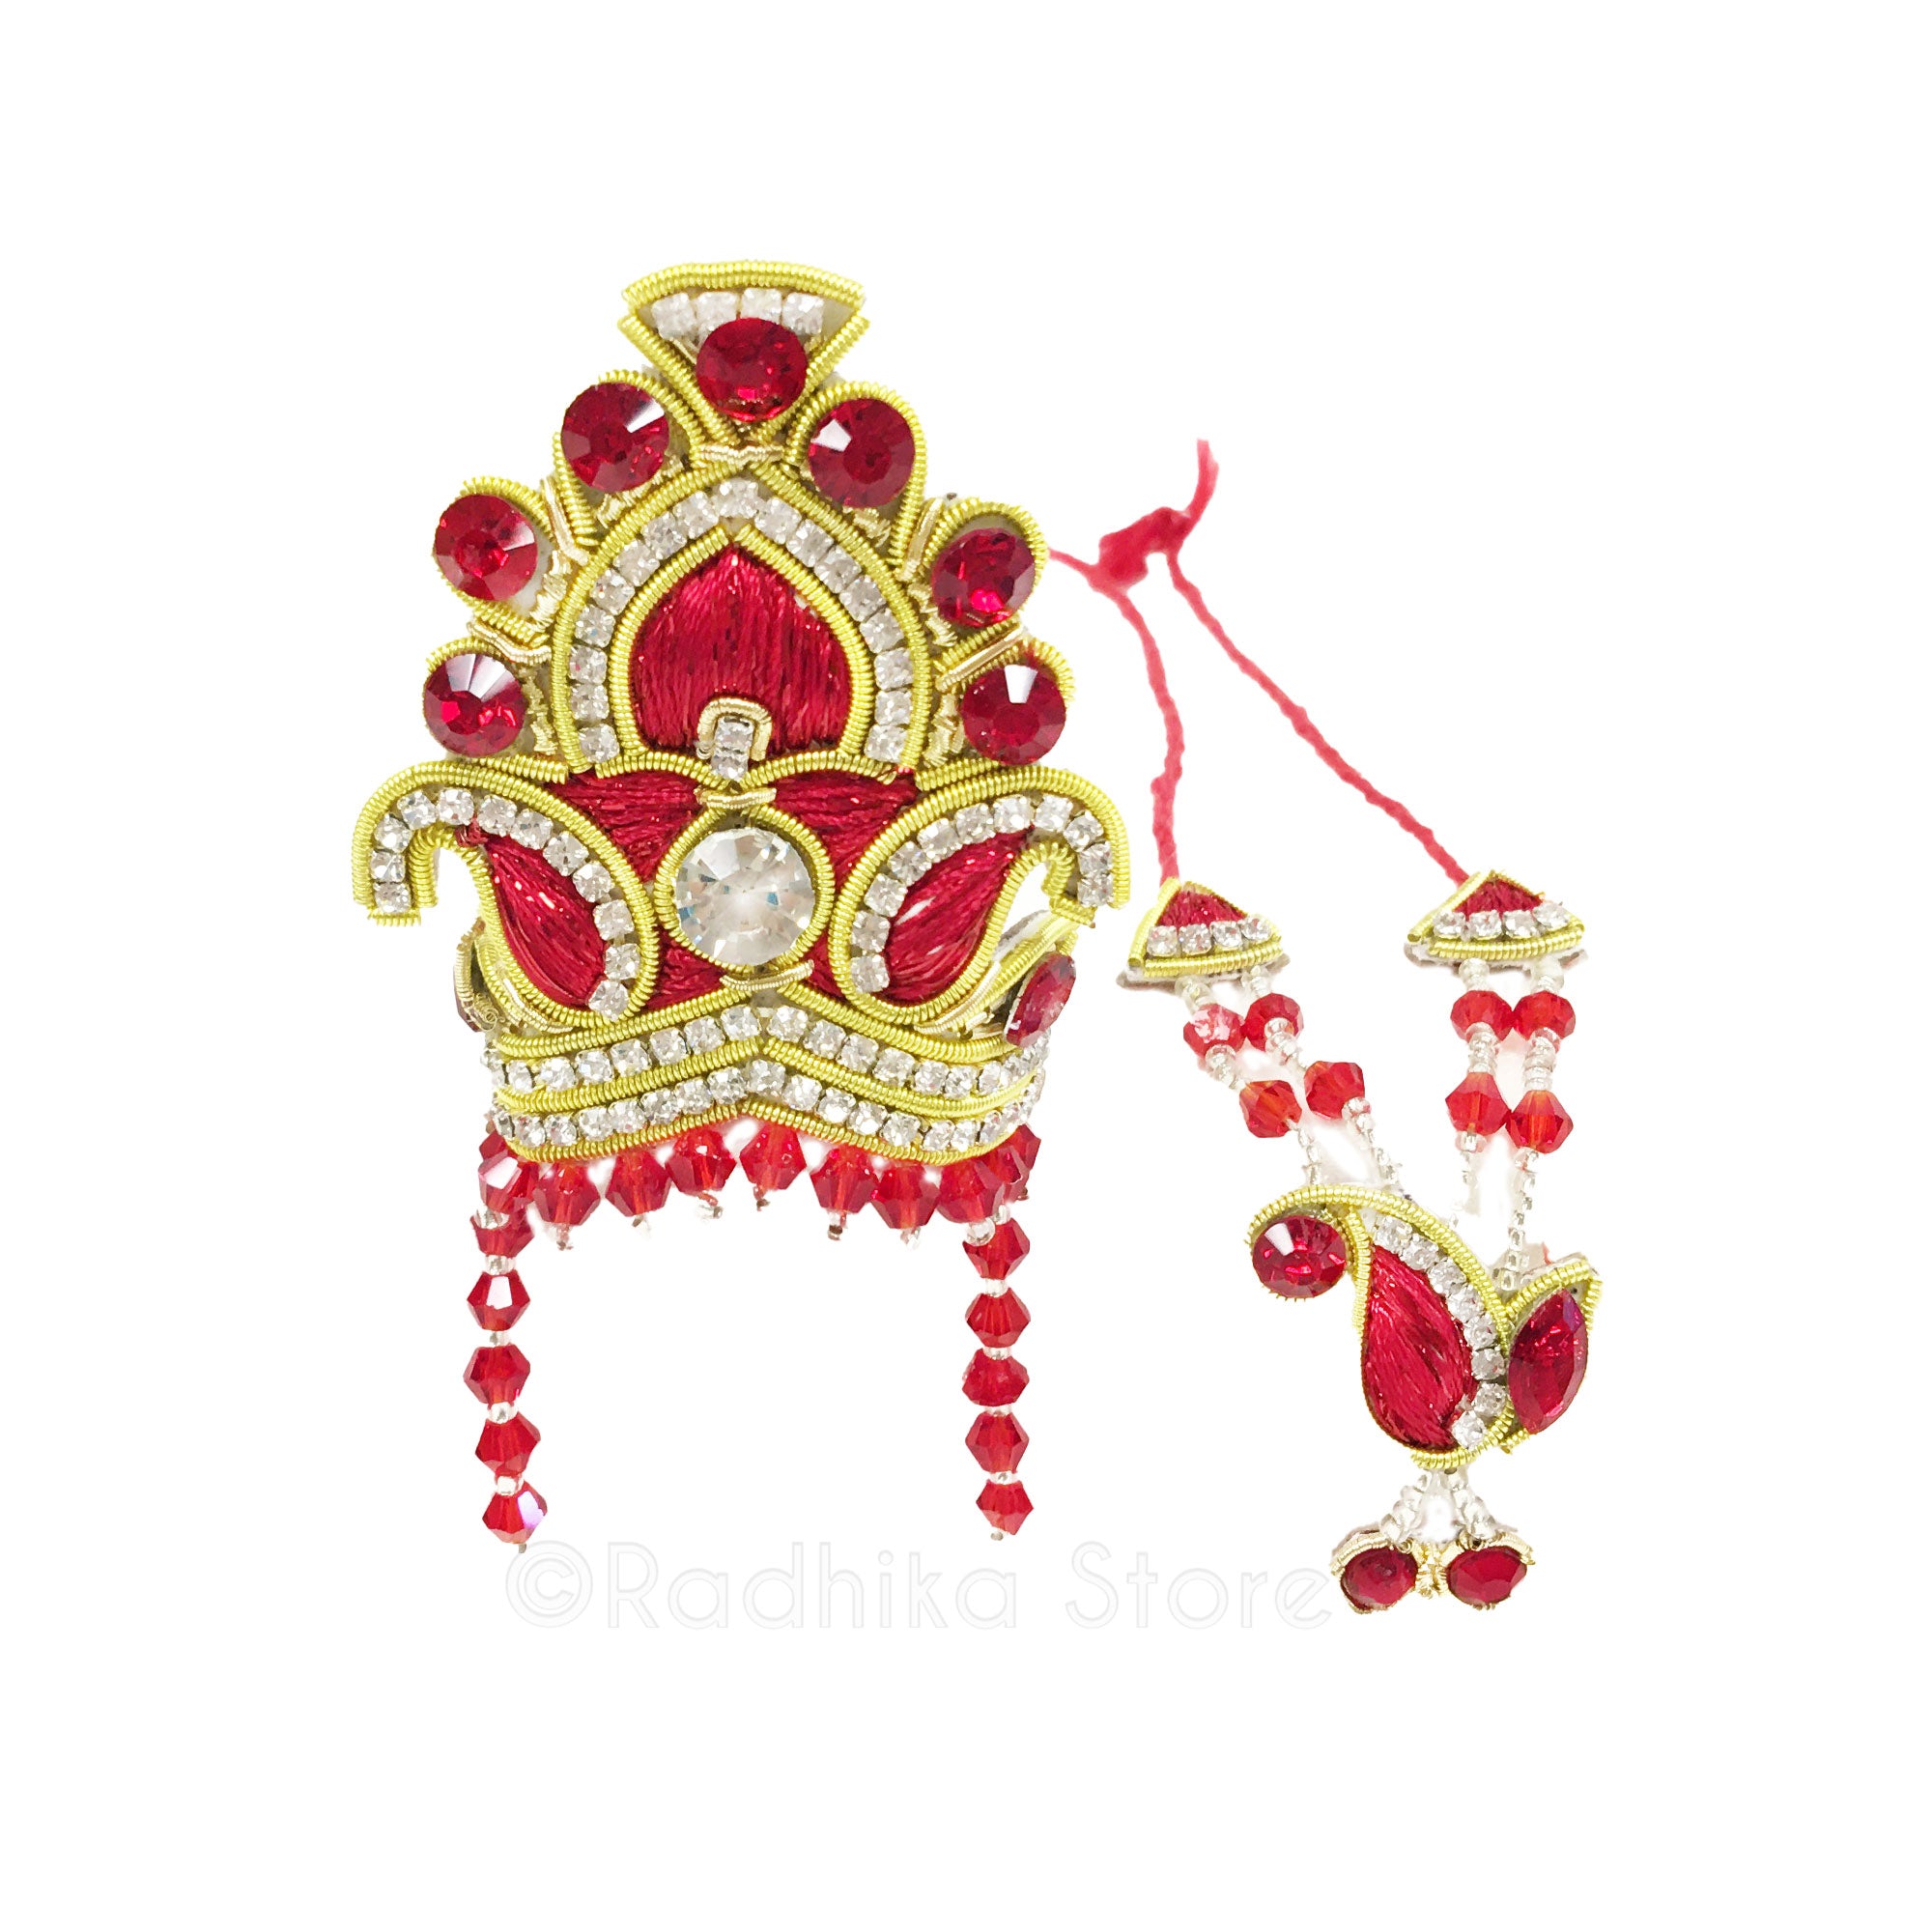 Lord of The Universe - Deity Crown and Necklace Set